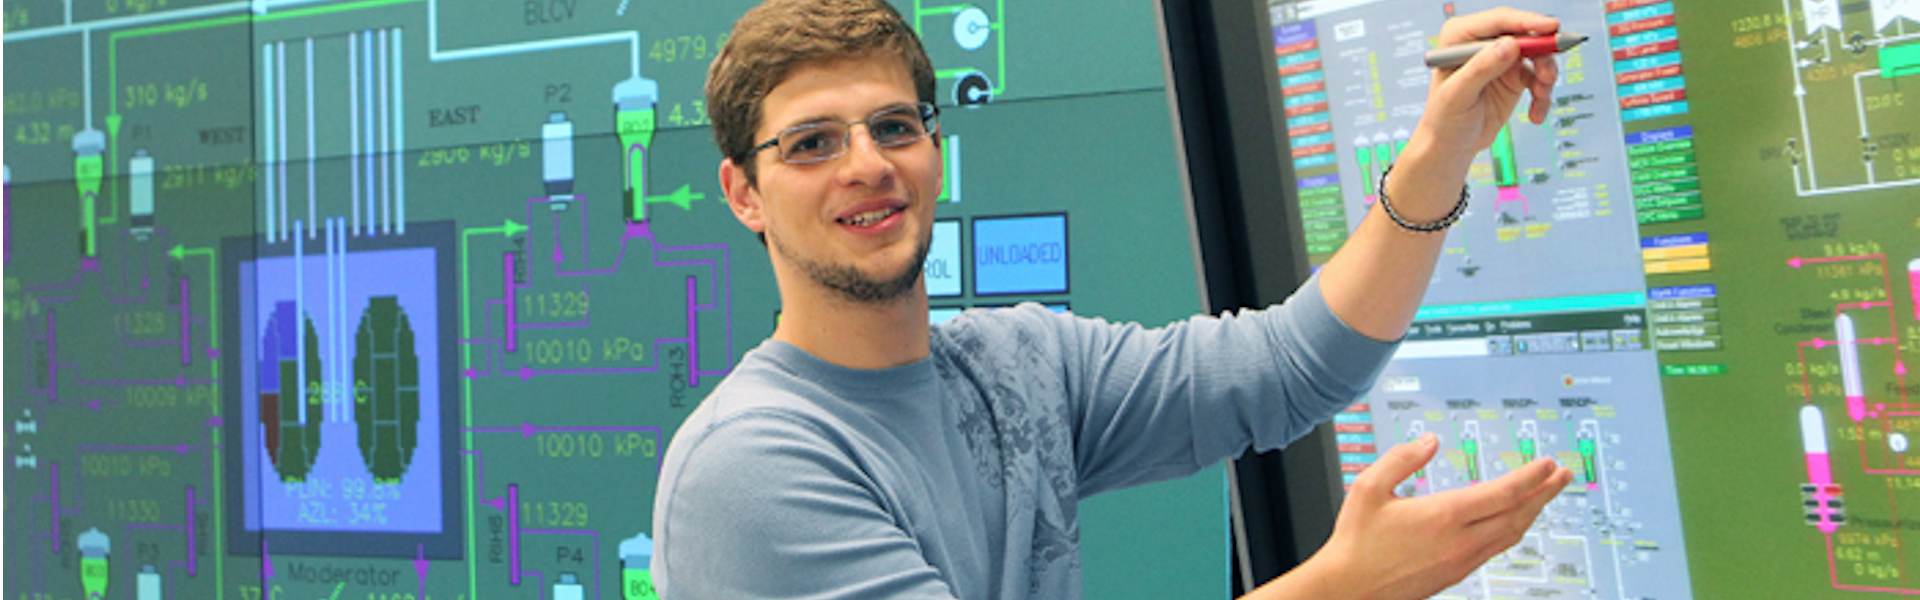 Student in front of display of circuit diagram